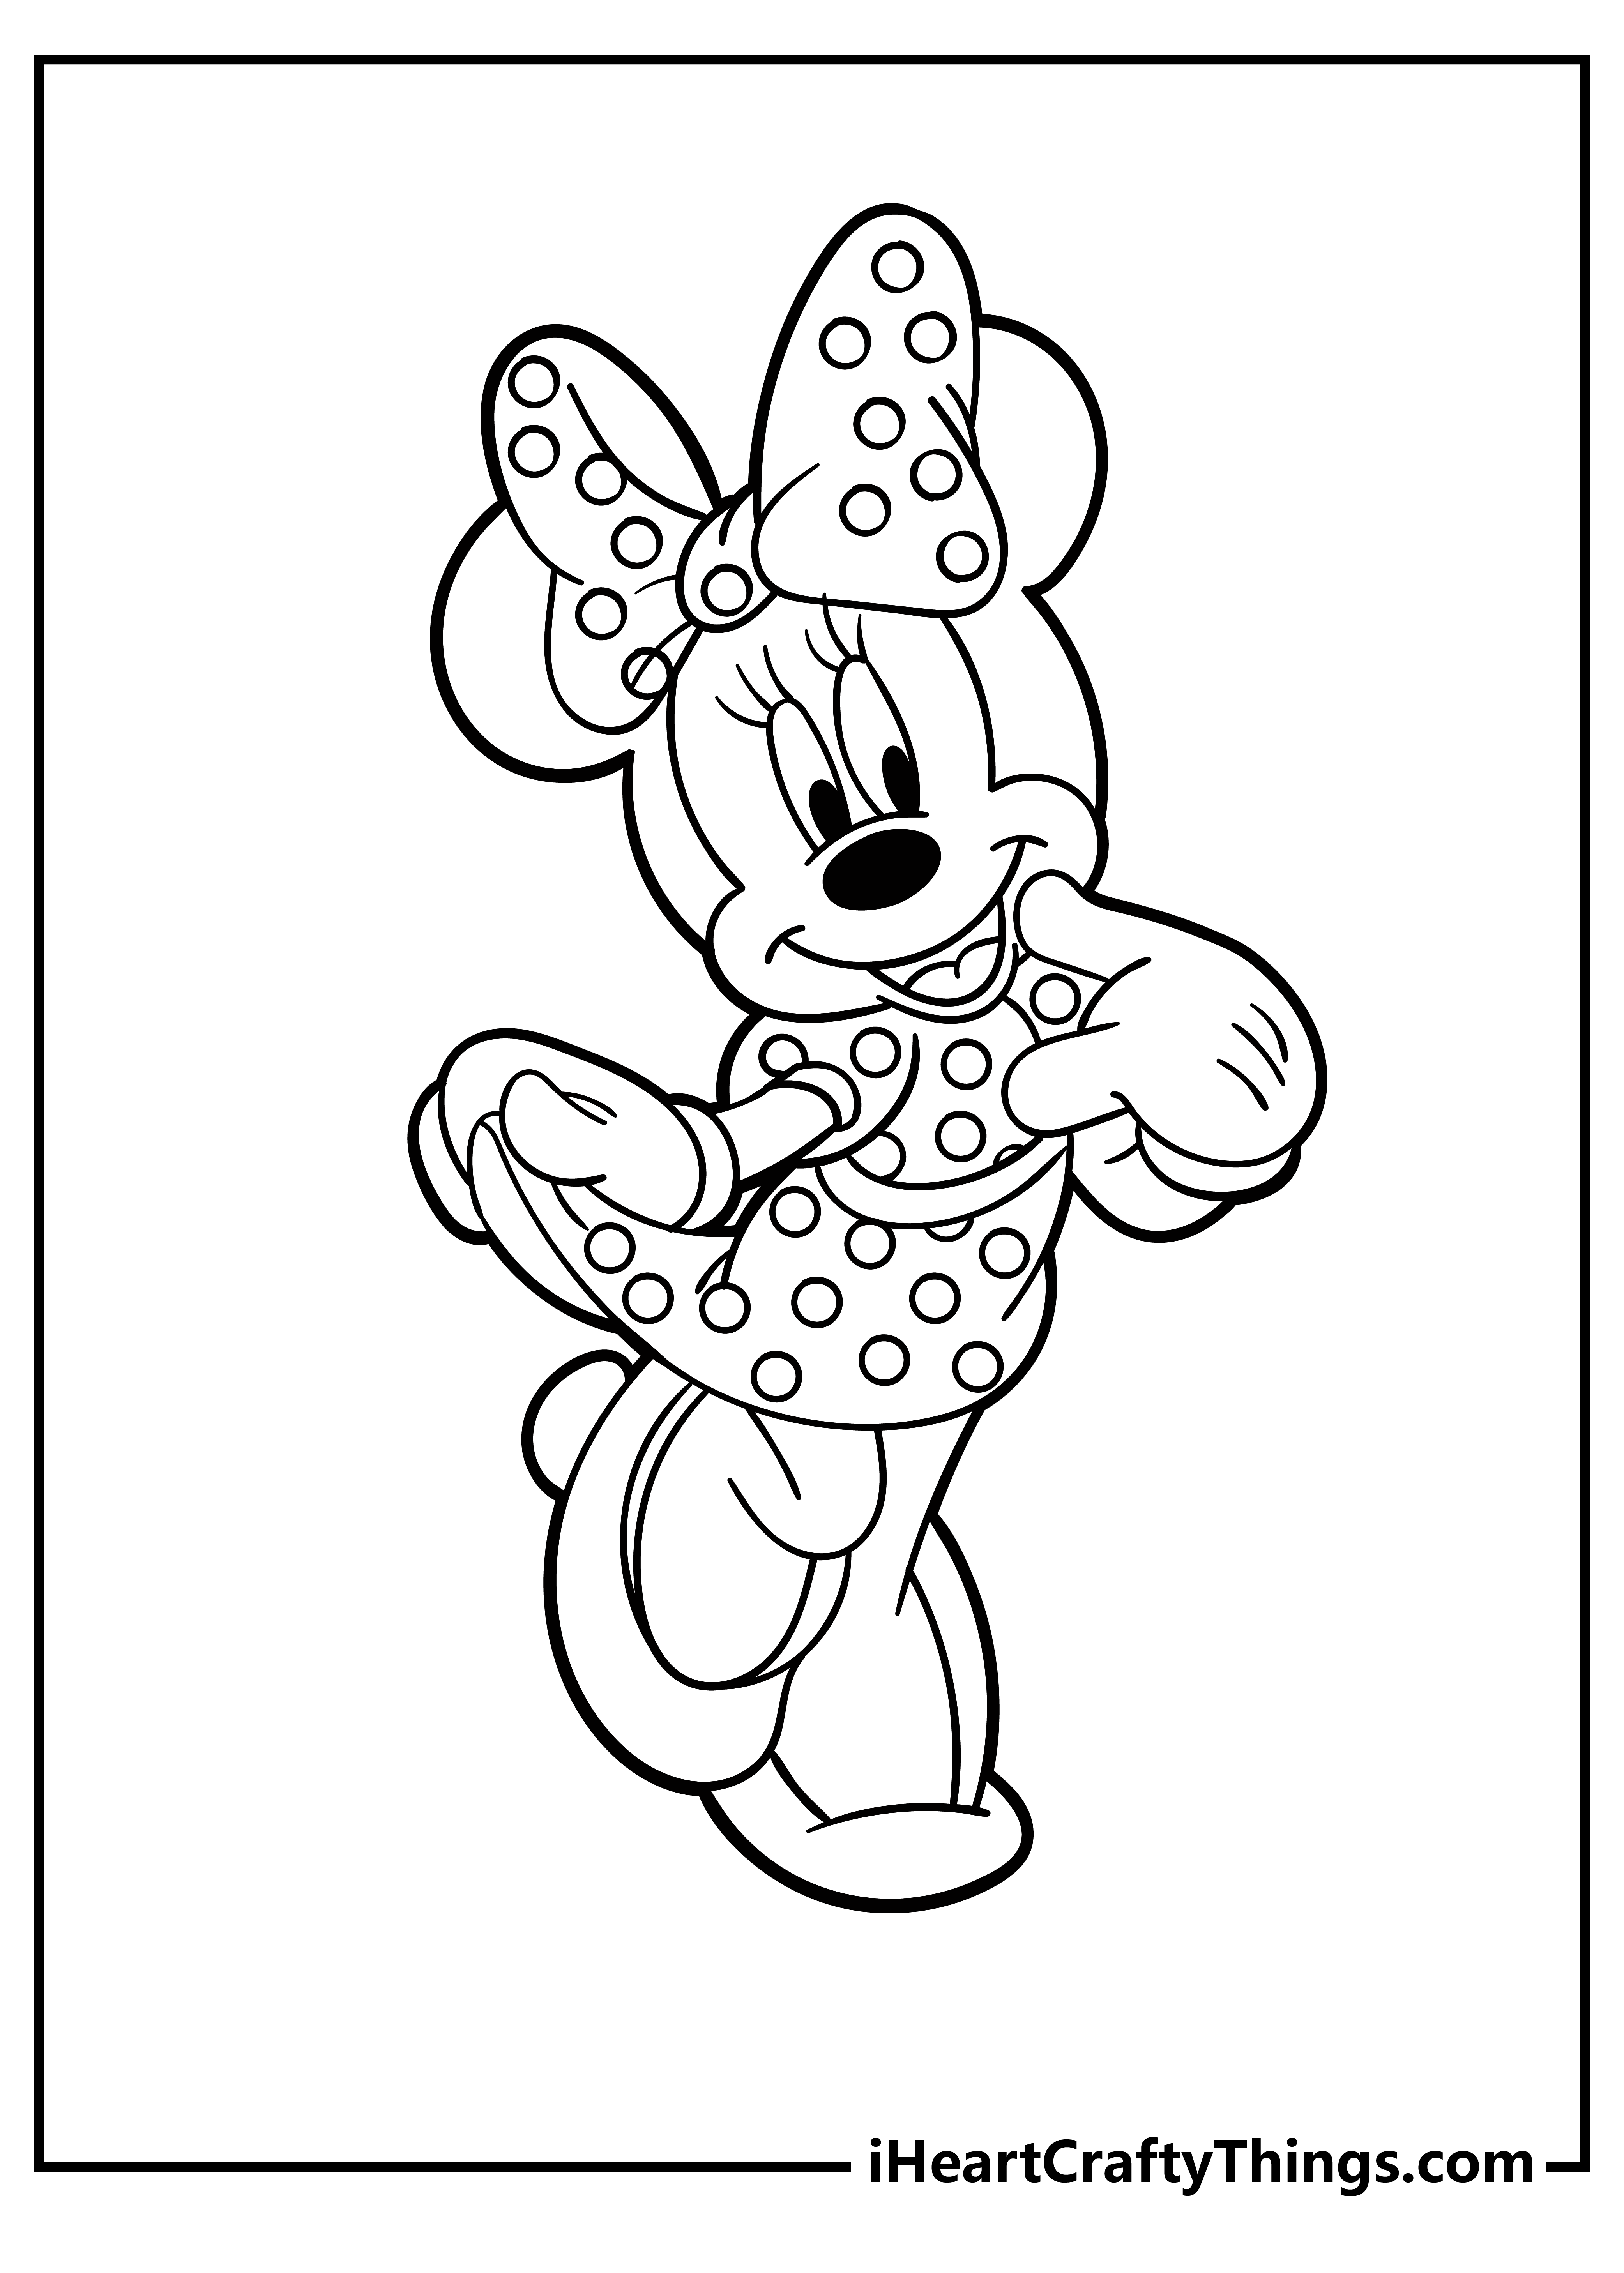 Minnie mouse coloring pages minnie mouse coloring pages minnie mouse color